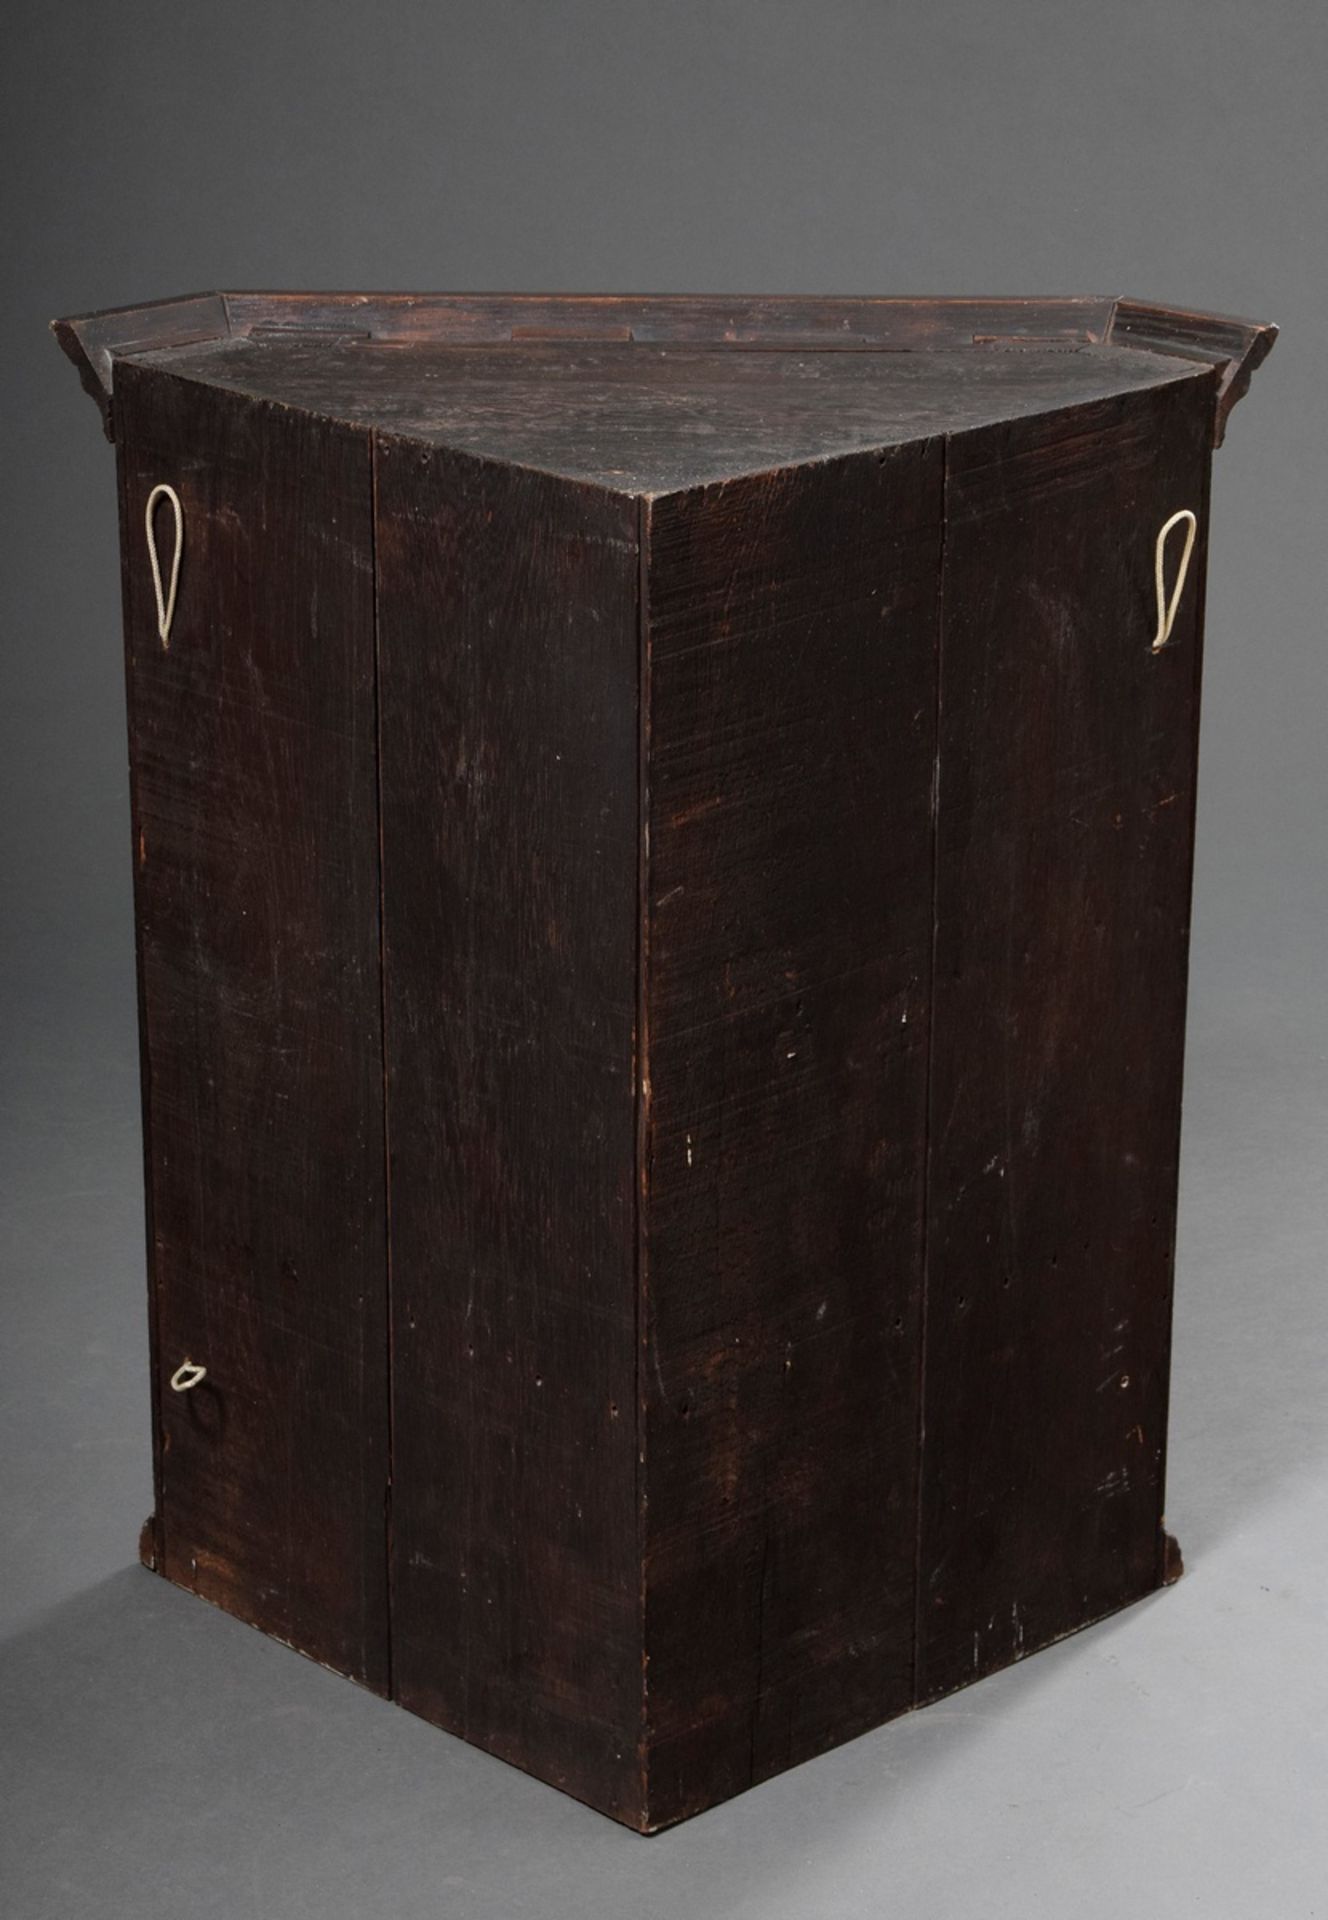 English oak corner wall cupboard, around 1800, dark stained with "star" inlay in the door, 76x61cm, - Image 4 of 4